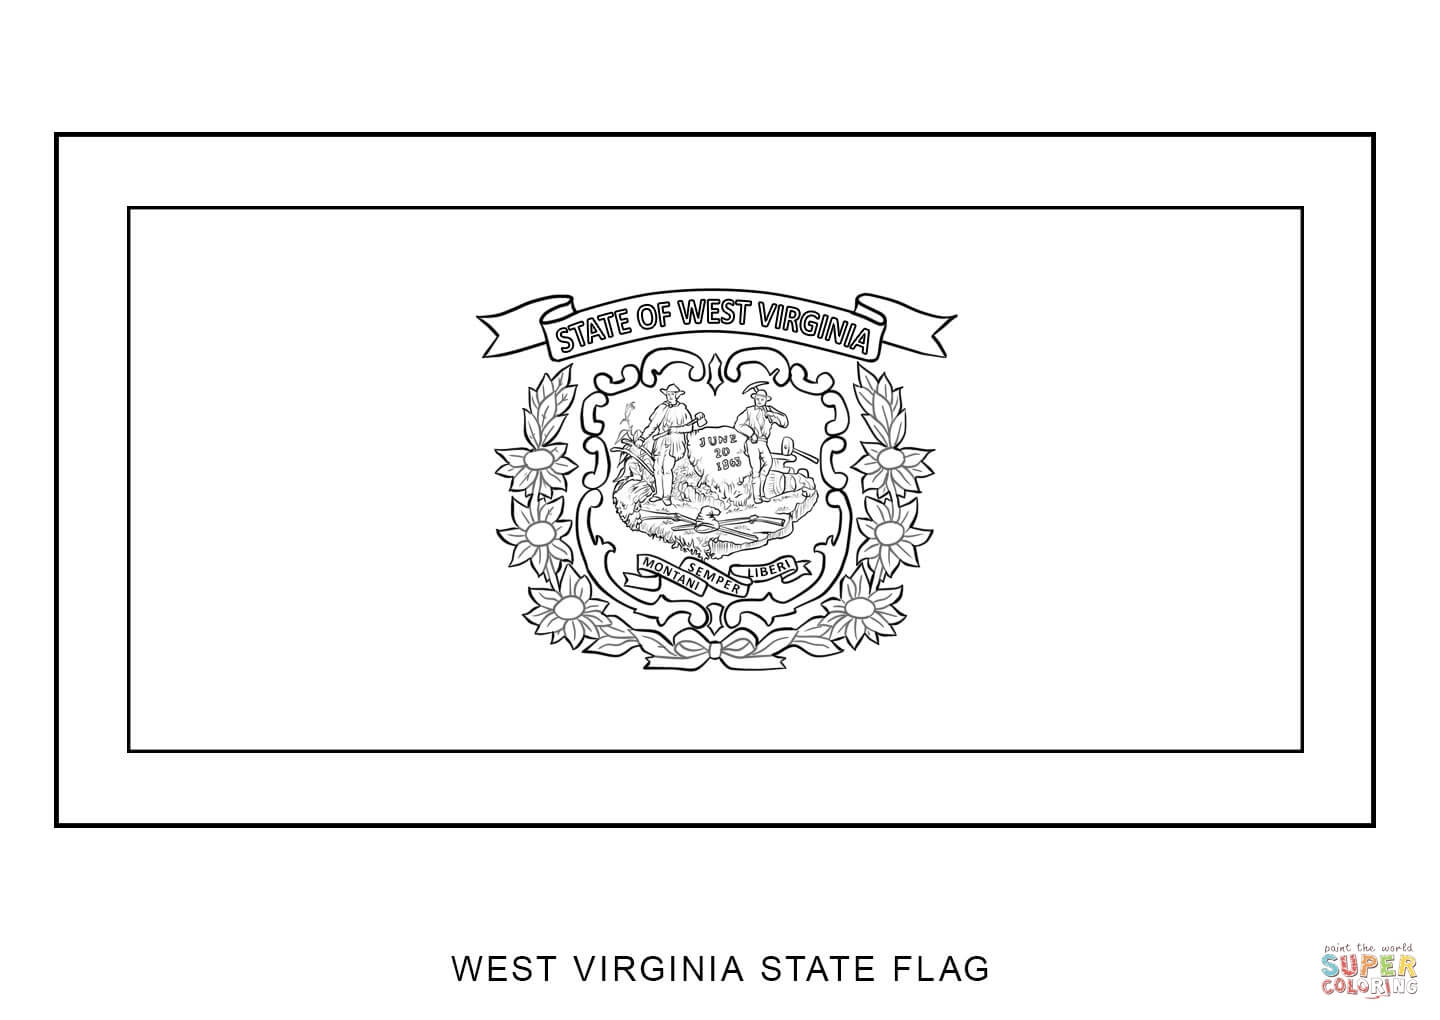 West Virginia State Flag coloring page | Free Printable Coloring Pages